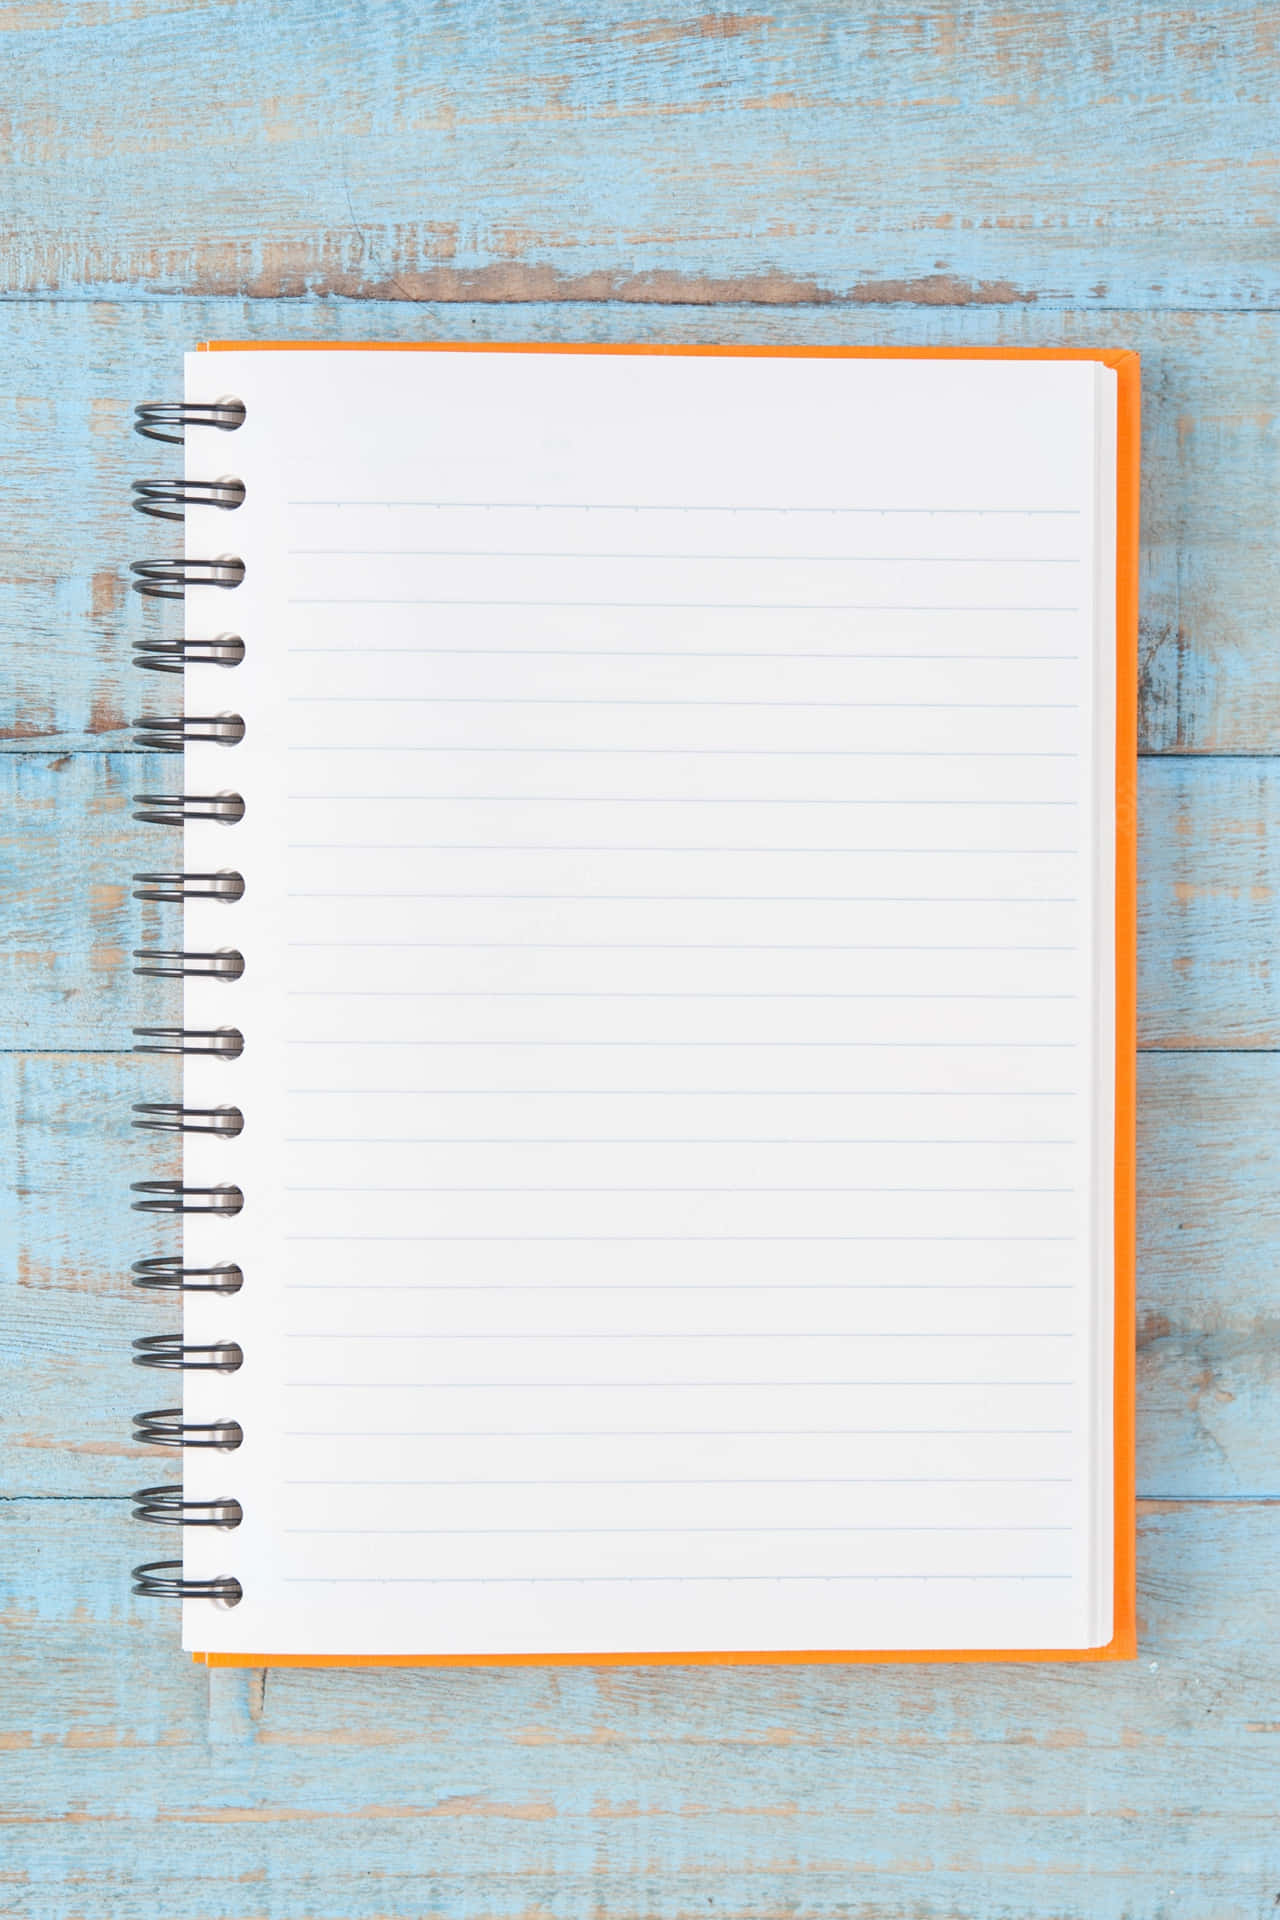 A Notebook On A Blue Wooden Background